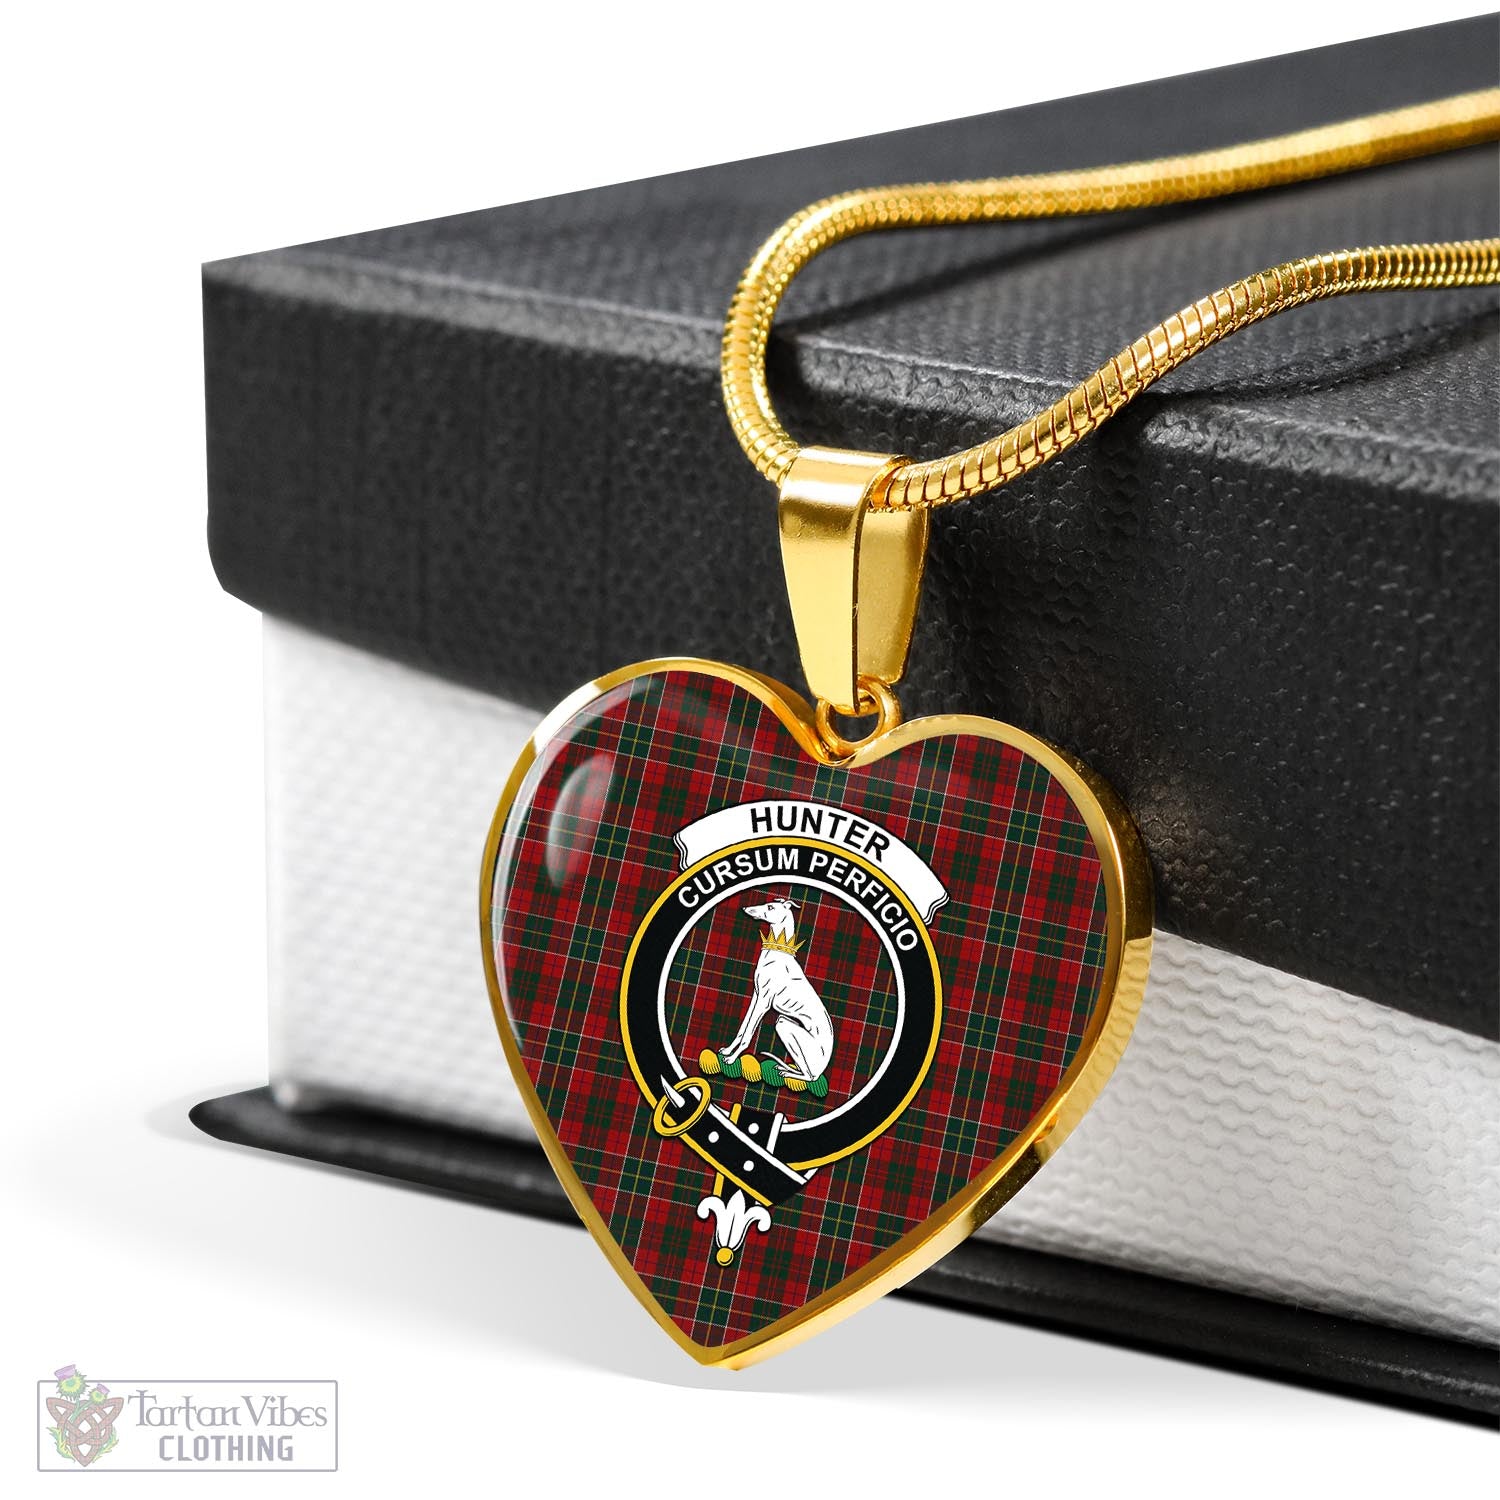 Tartan Vibes Clothing Hunter USA Tartan Heart Necklace with Family Crest